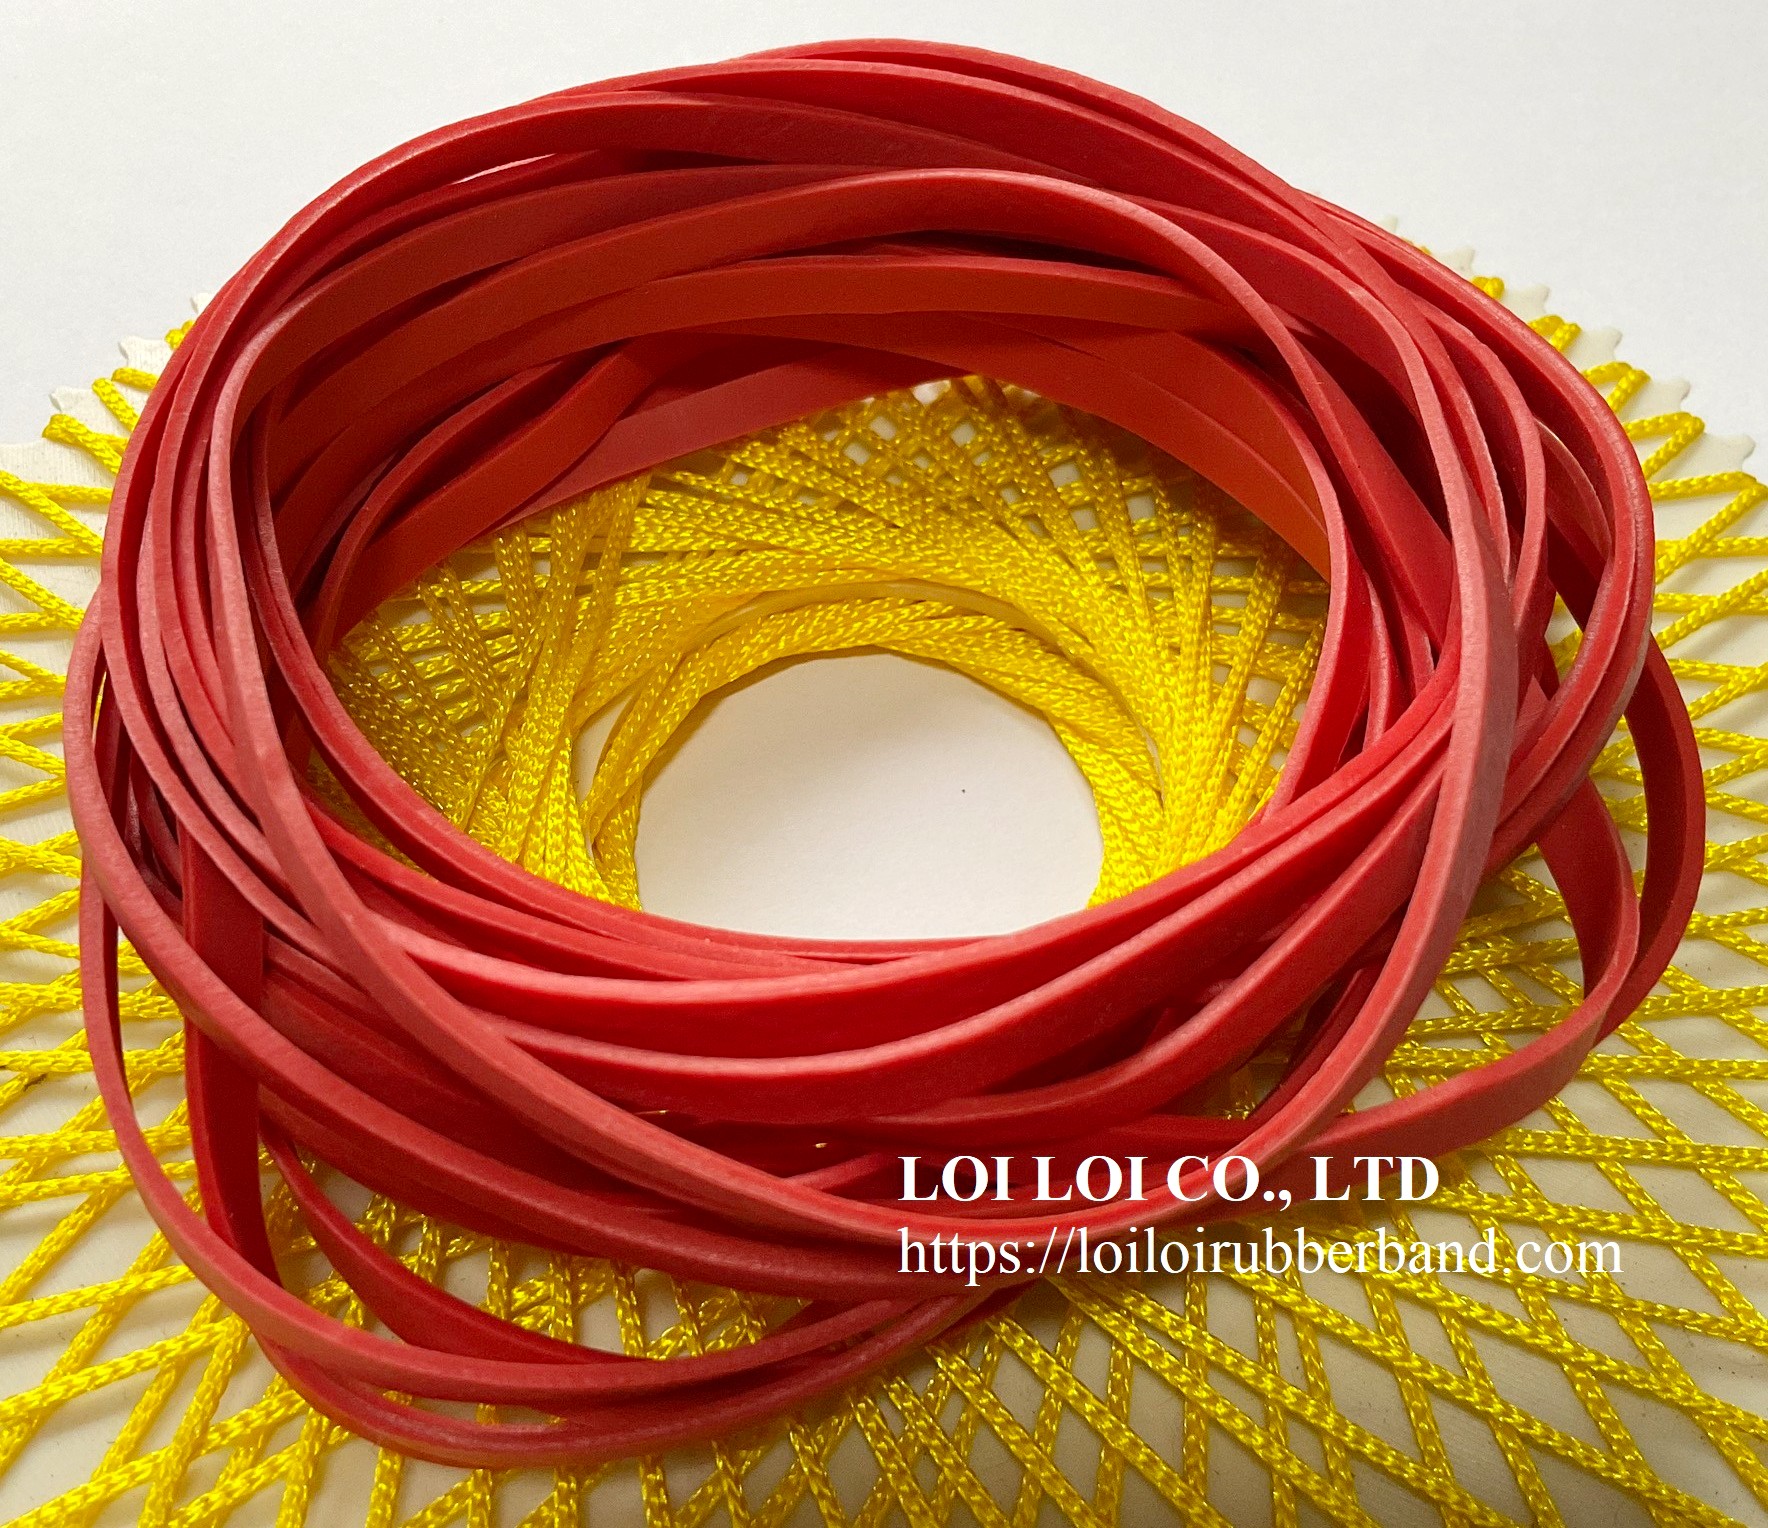 HOT ITEM Reb rubber band with various size, Thickness 1.5mm & Cut width 1.5mm very strong and not easy broken 